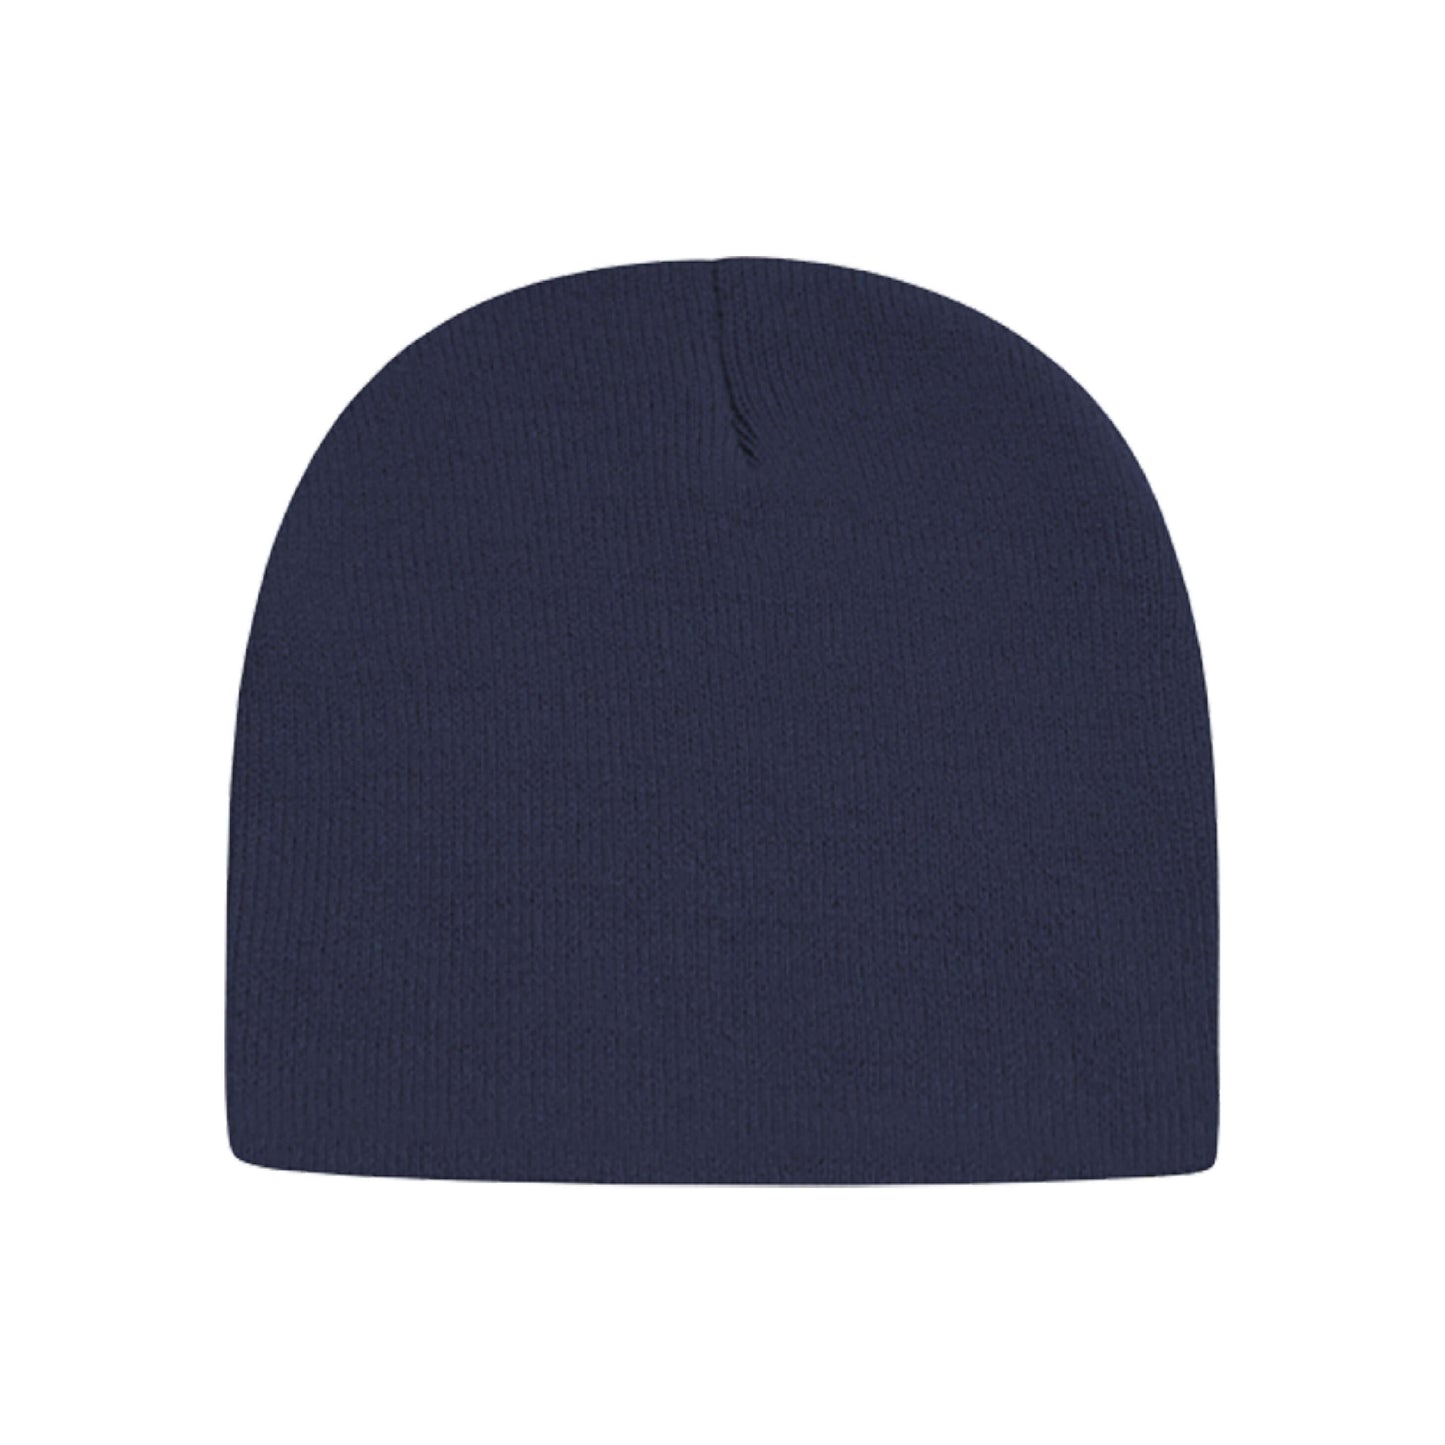 USA- Made Sustainable Knit 8.5" Beanie